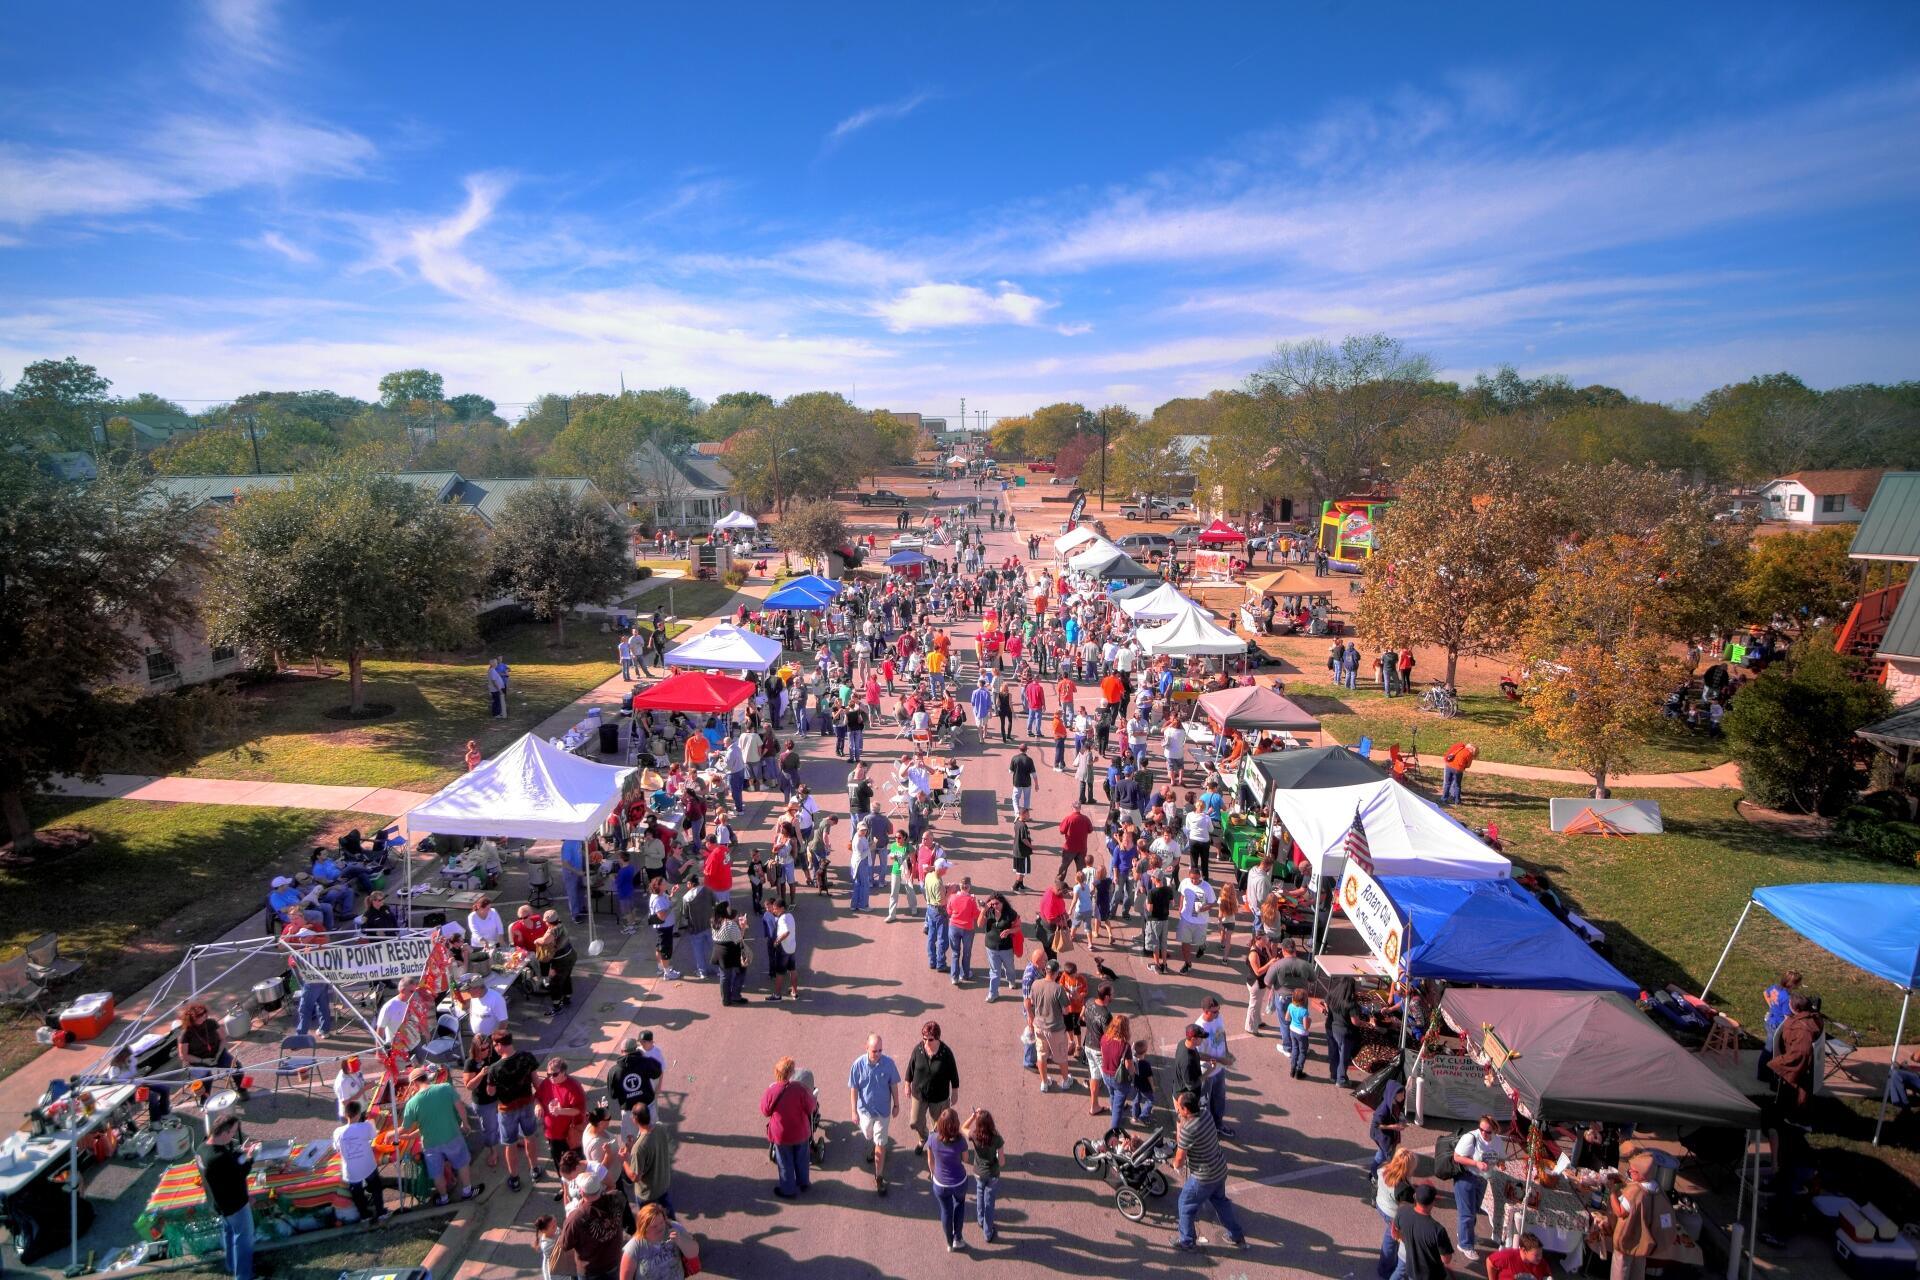 Pfall Chili Pfest is Saturday in downtown Pflugerville (City of